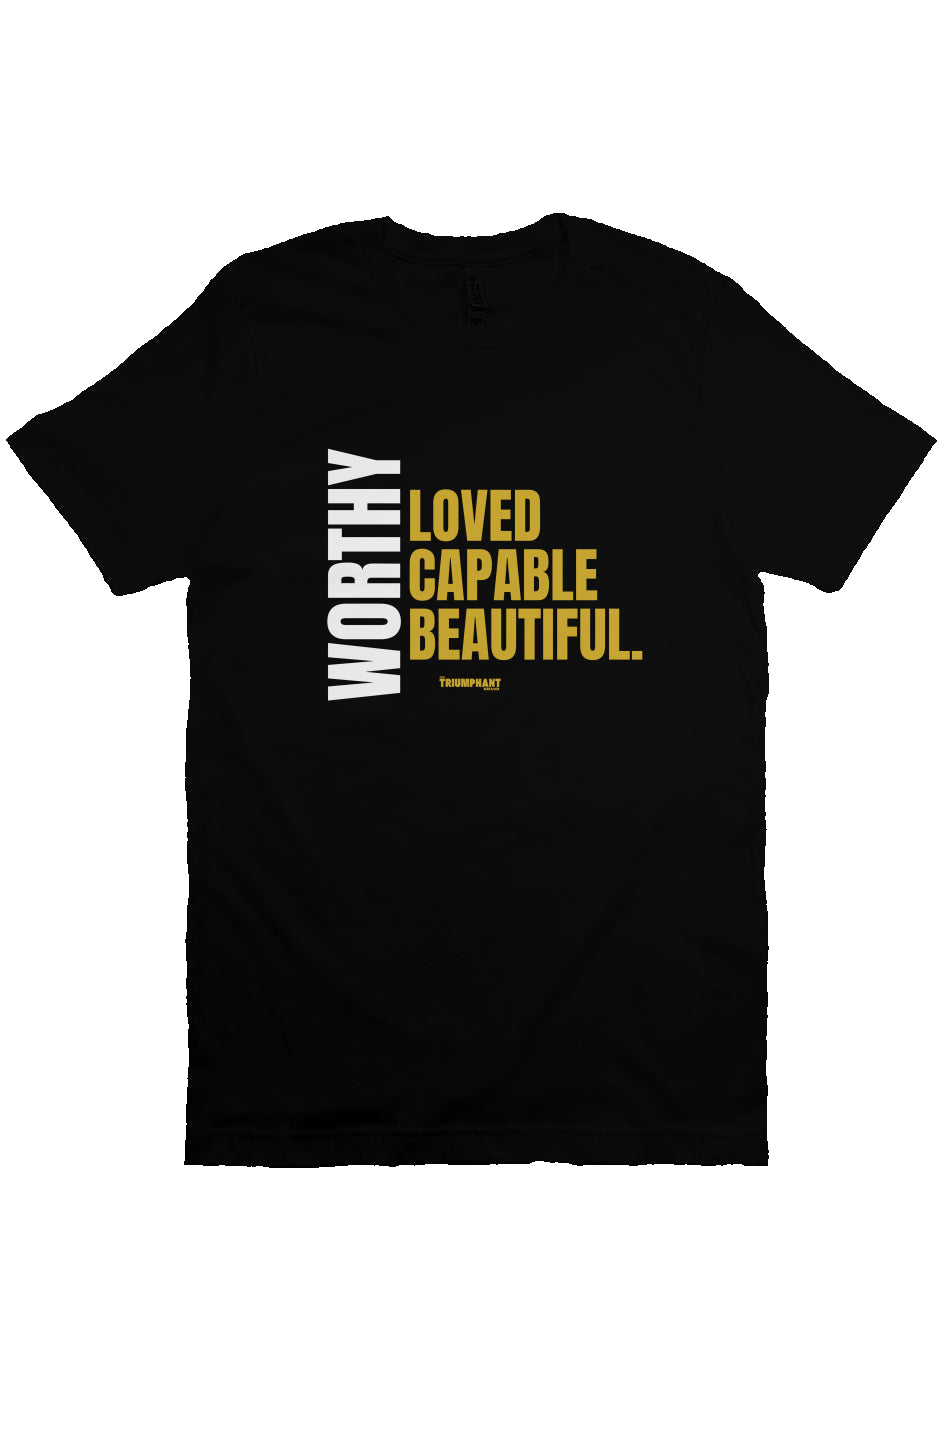 Worthy, Loved, Capable, Beautiful. | Triumphant Tee